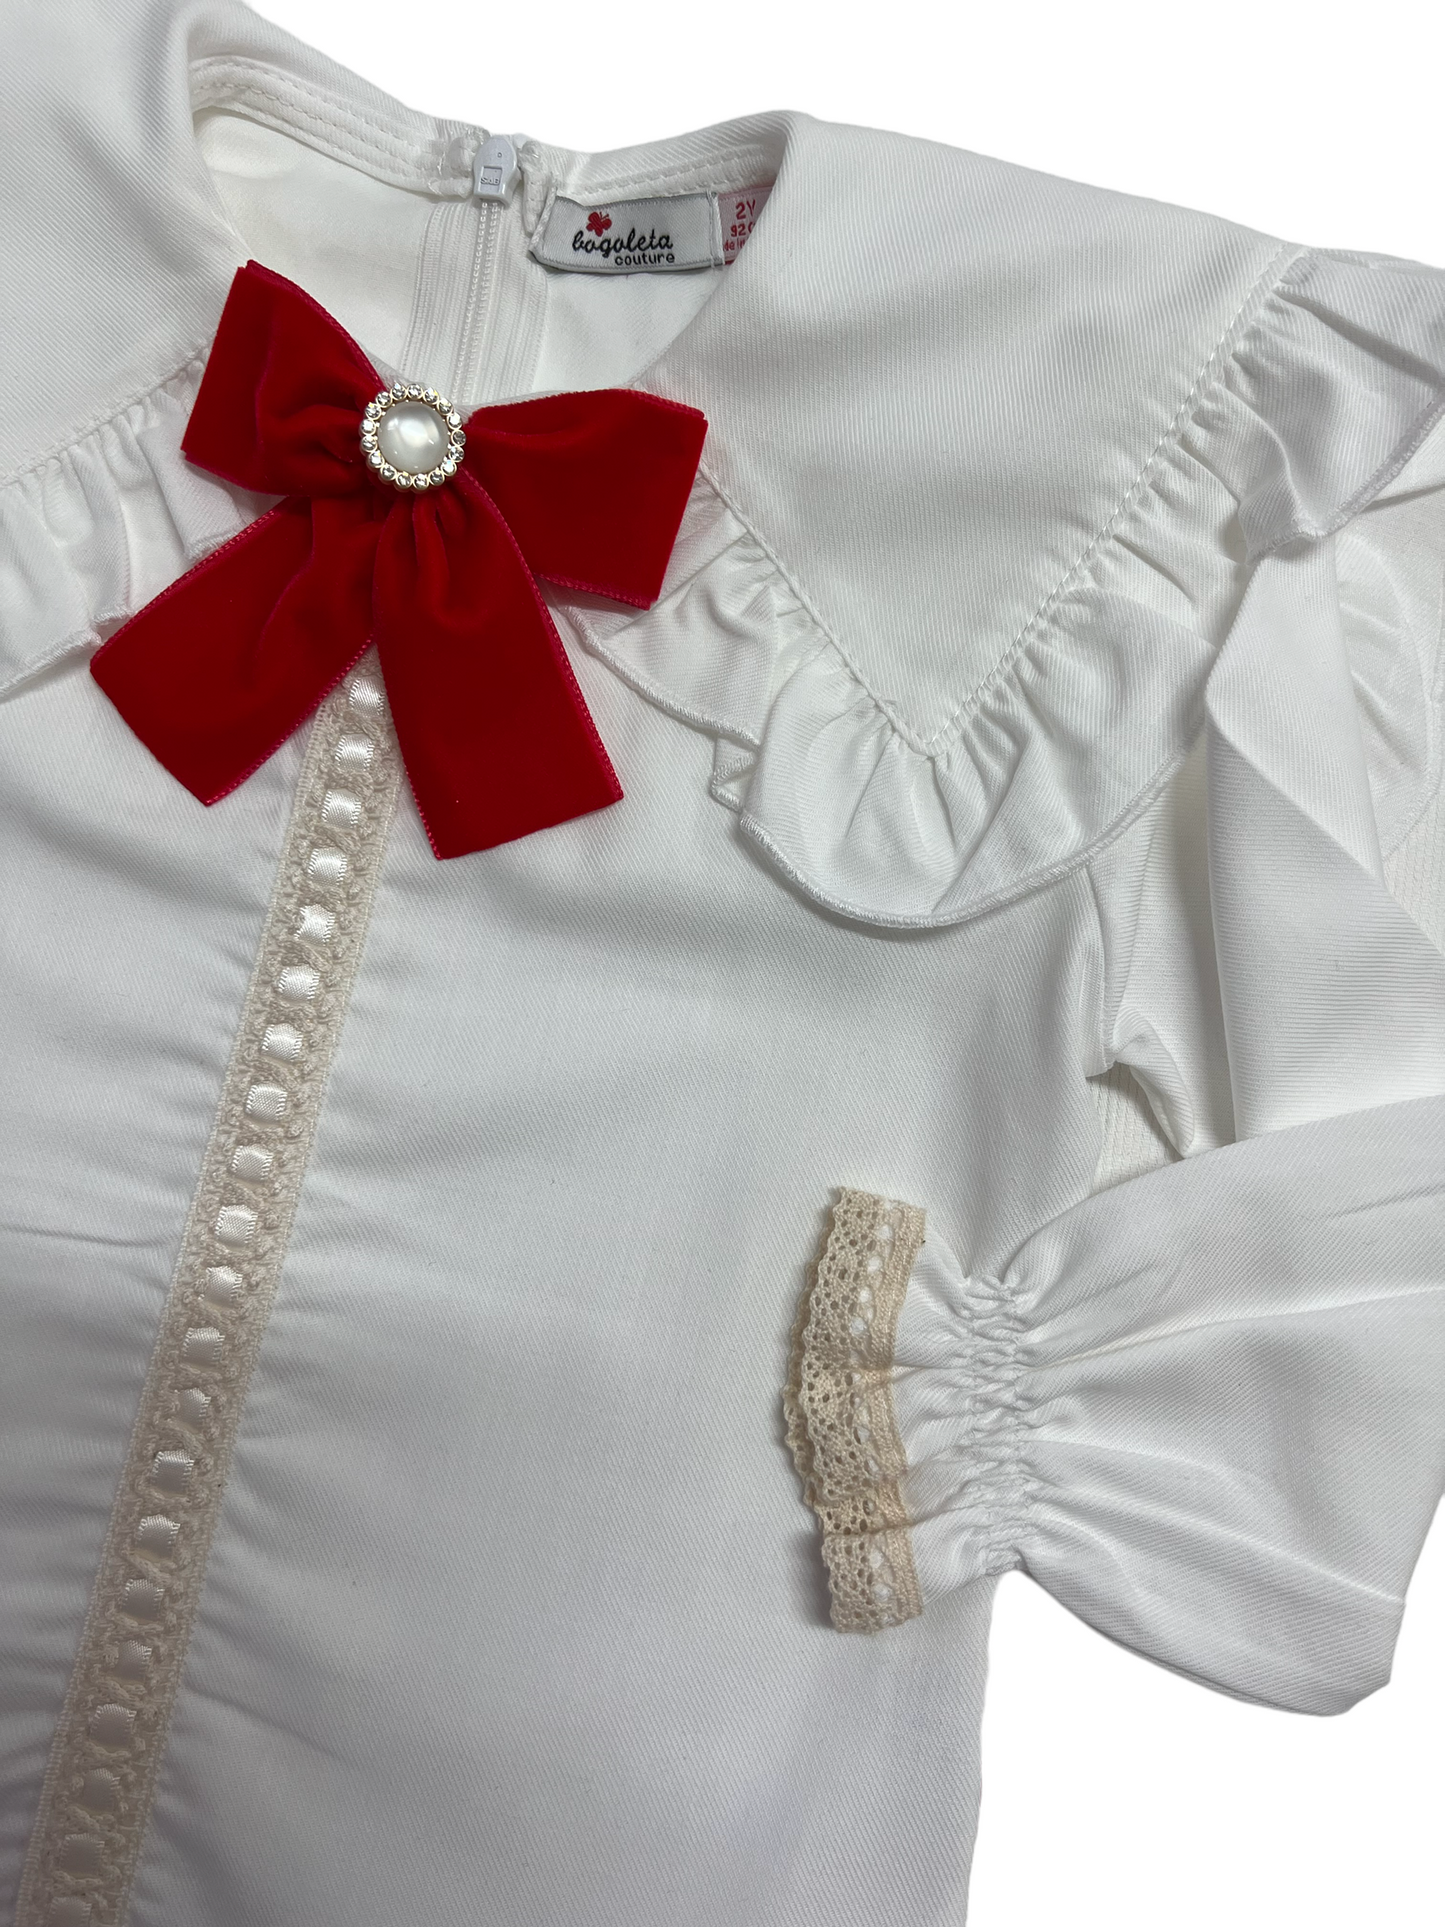 Sailor Collar Shirt with Removable Tie